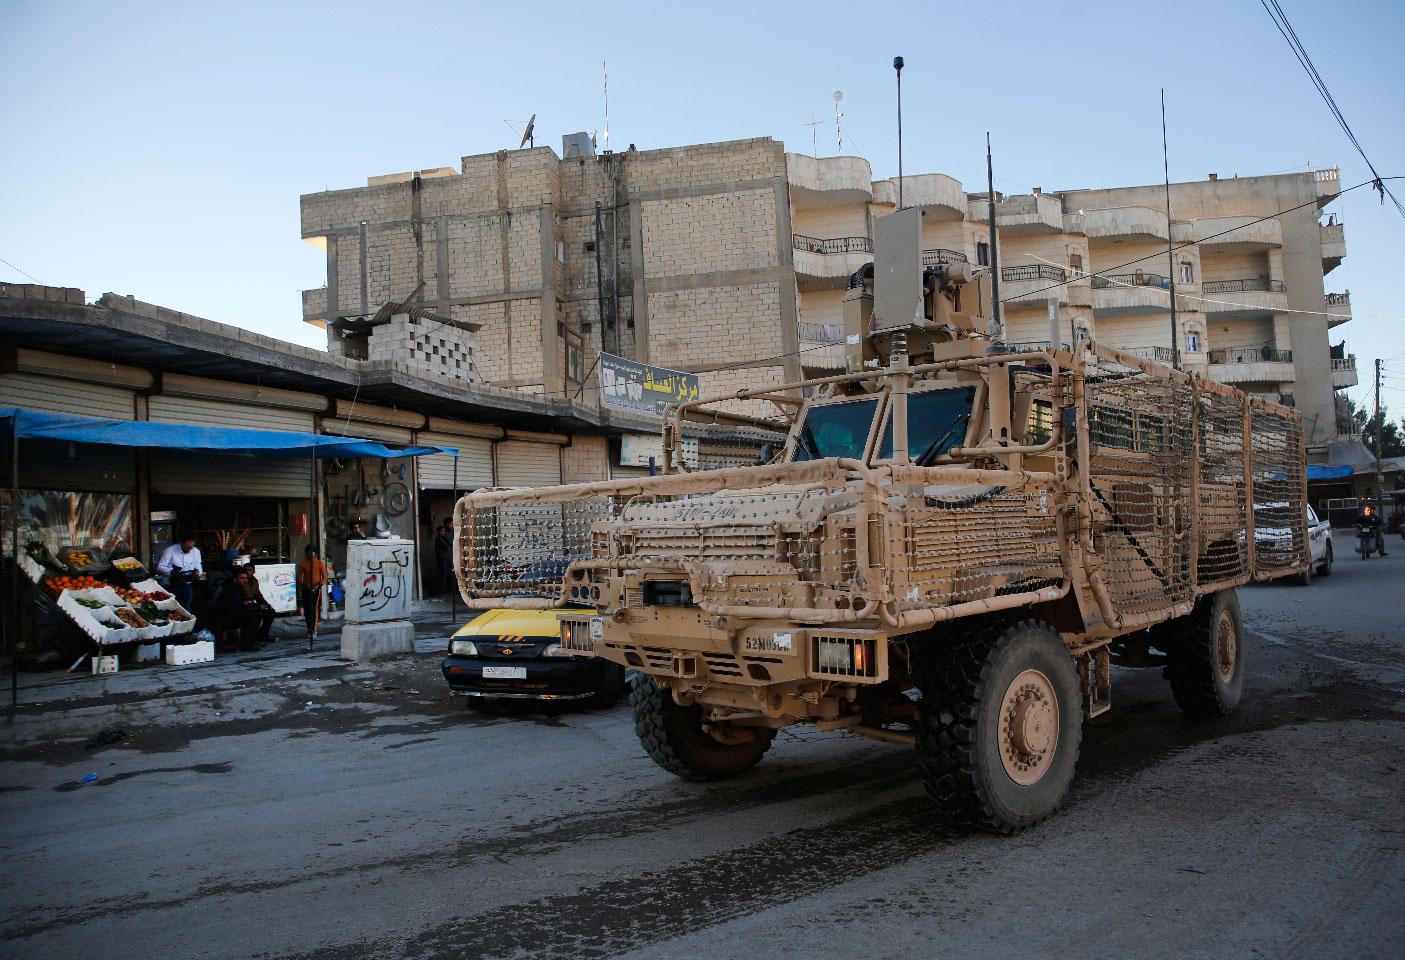 A vehicle of US troops passing on a street, in Manbij town, north Syria on March 31, 2018.